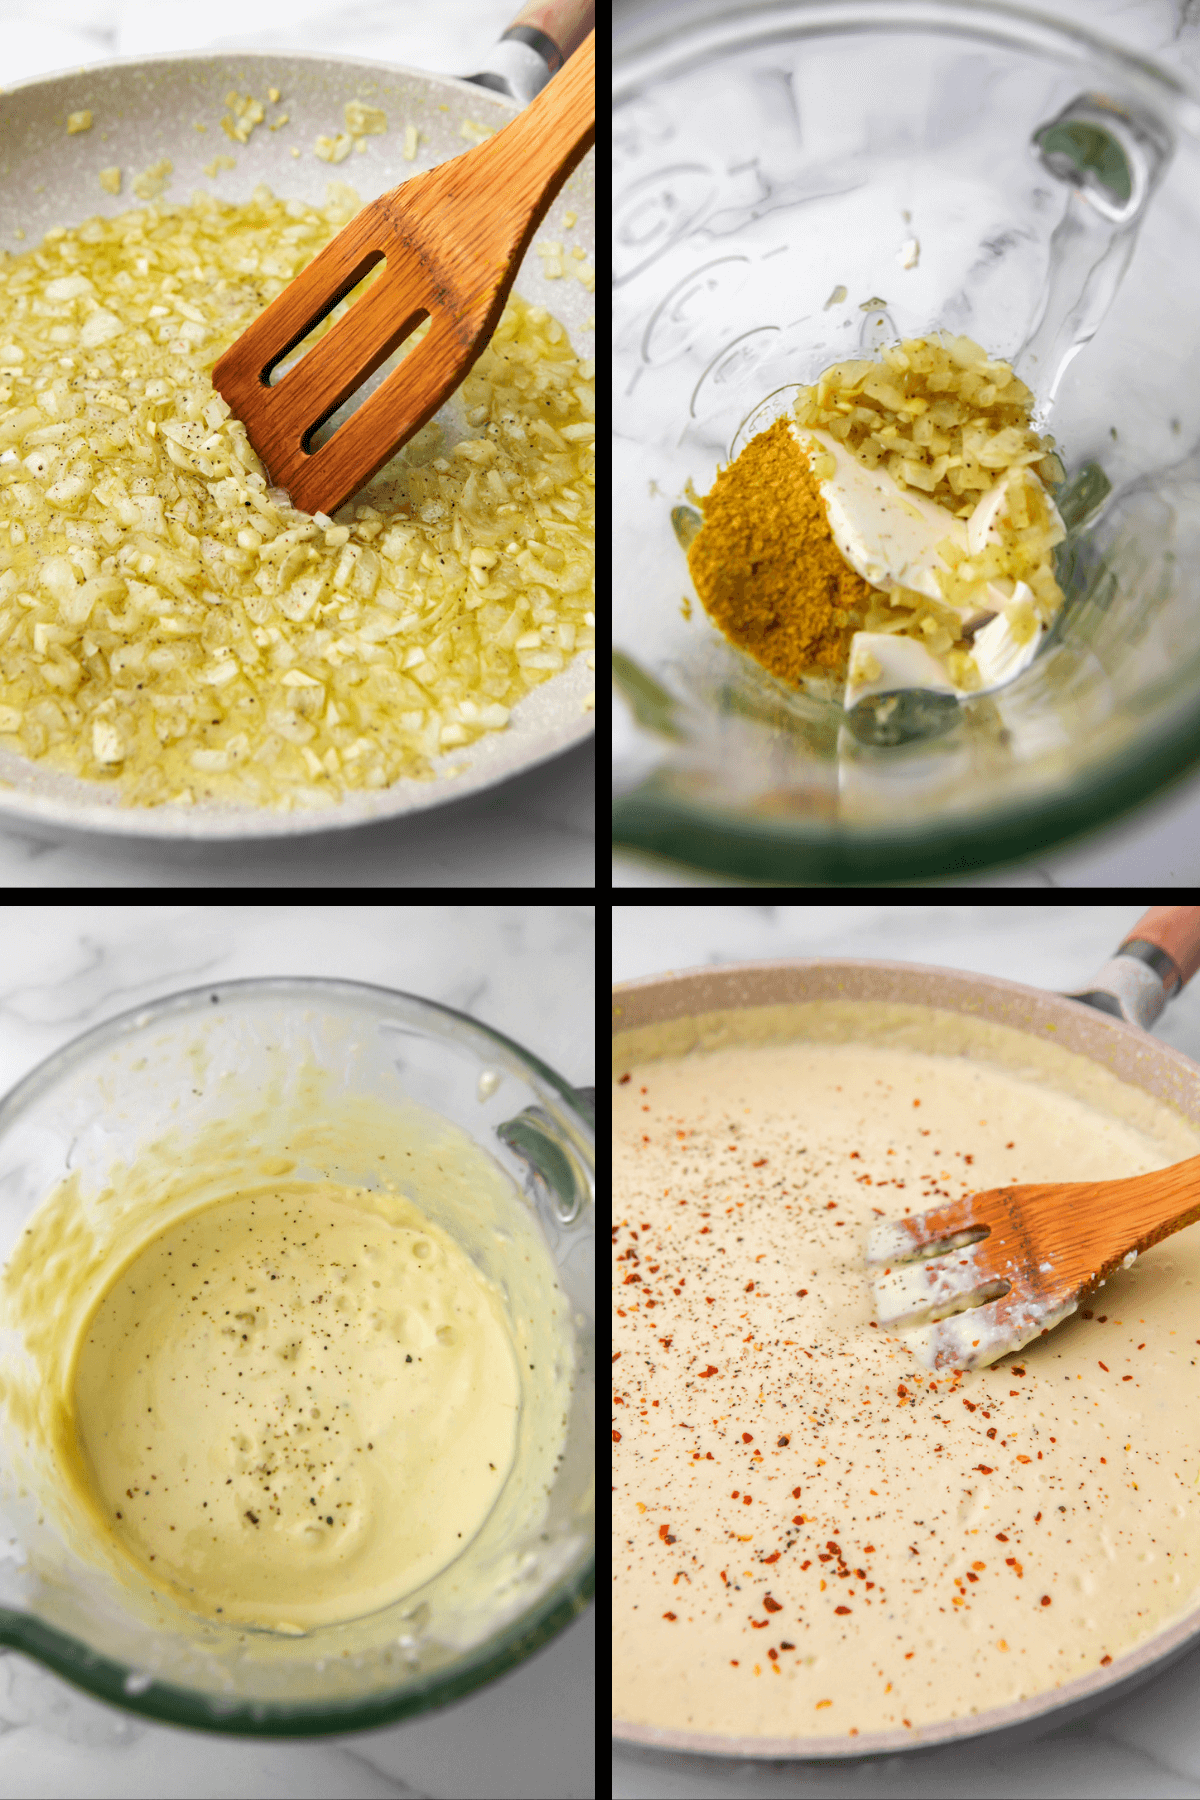 A collage of 4 images showing sauting onion and garlic then adding it to silken tofu and blendin it to make a creamy pasta sauce.